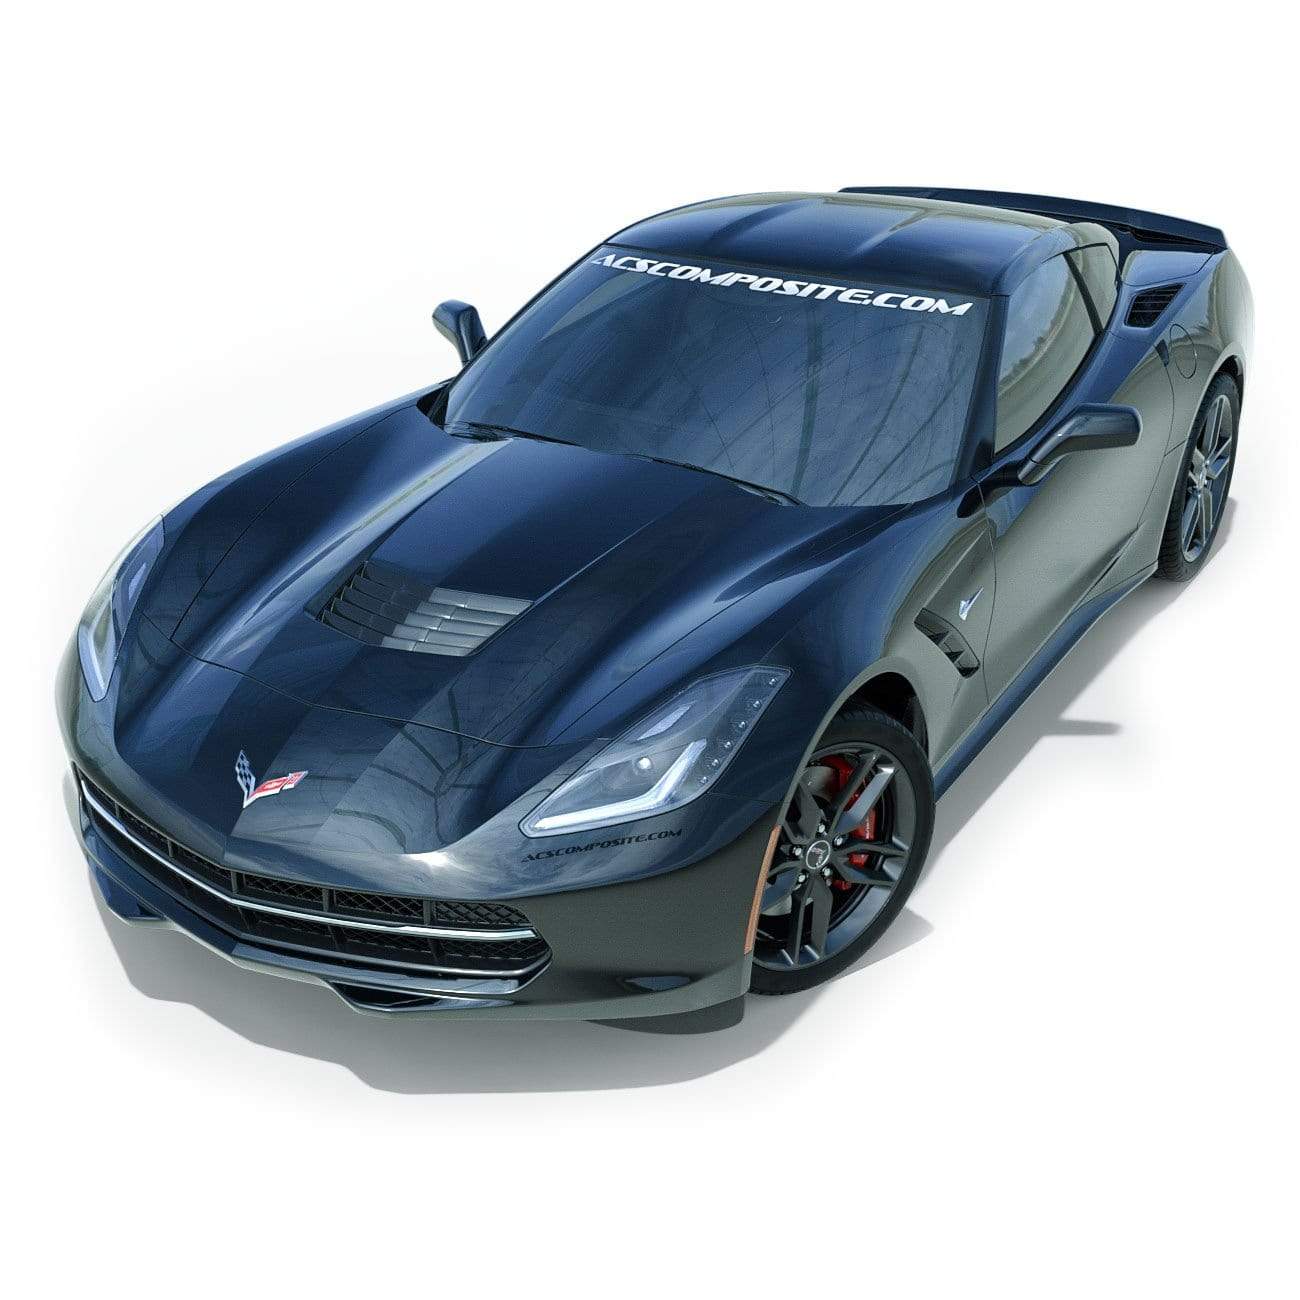 ACS Zero1 Side Rockers for C7 Corvette Stingray, made from OEM-validated RTM composite material, SKU 45-4-001CFZ.